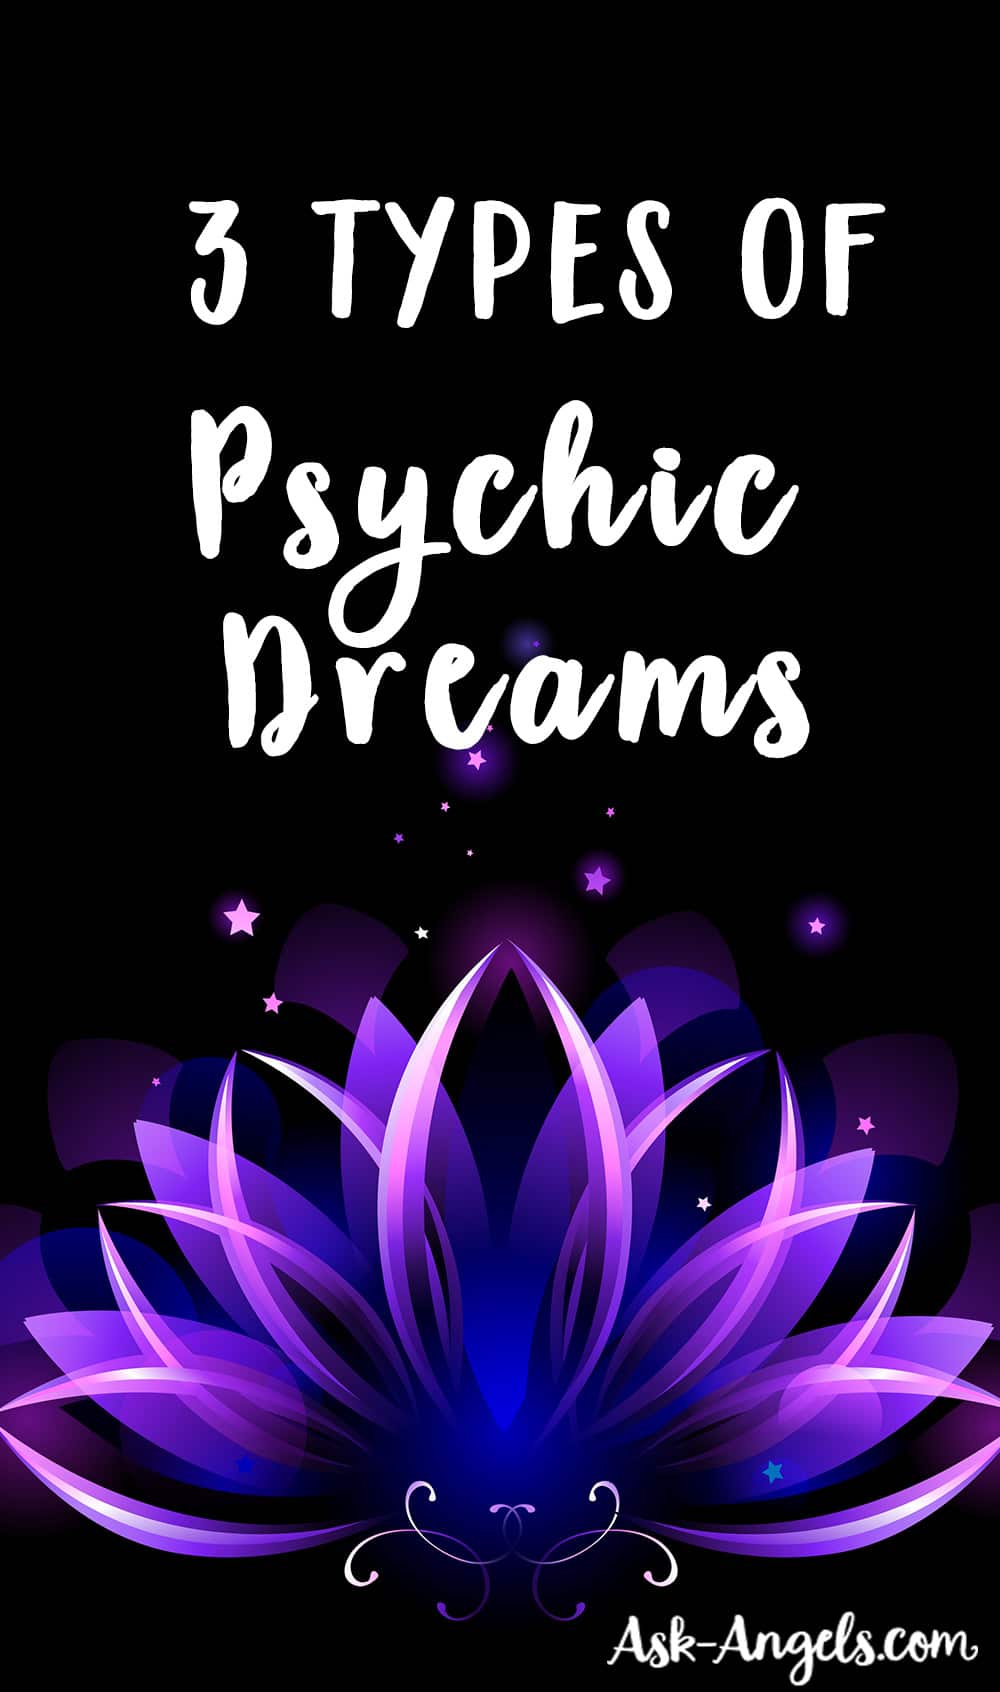 Psychic Dreams- The 3 Types